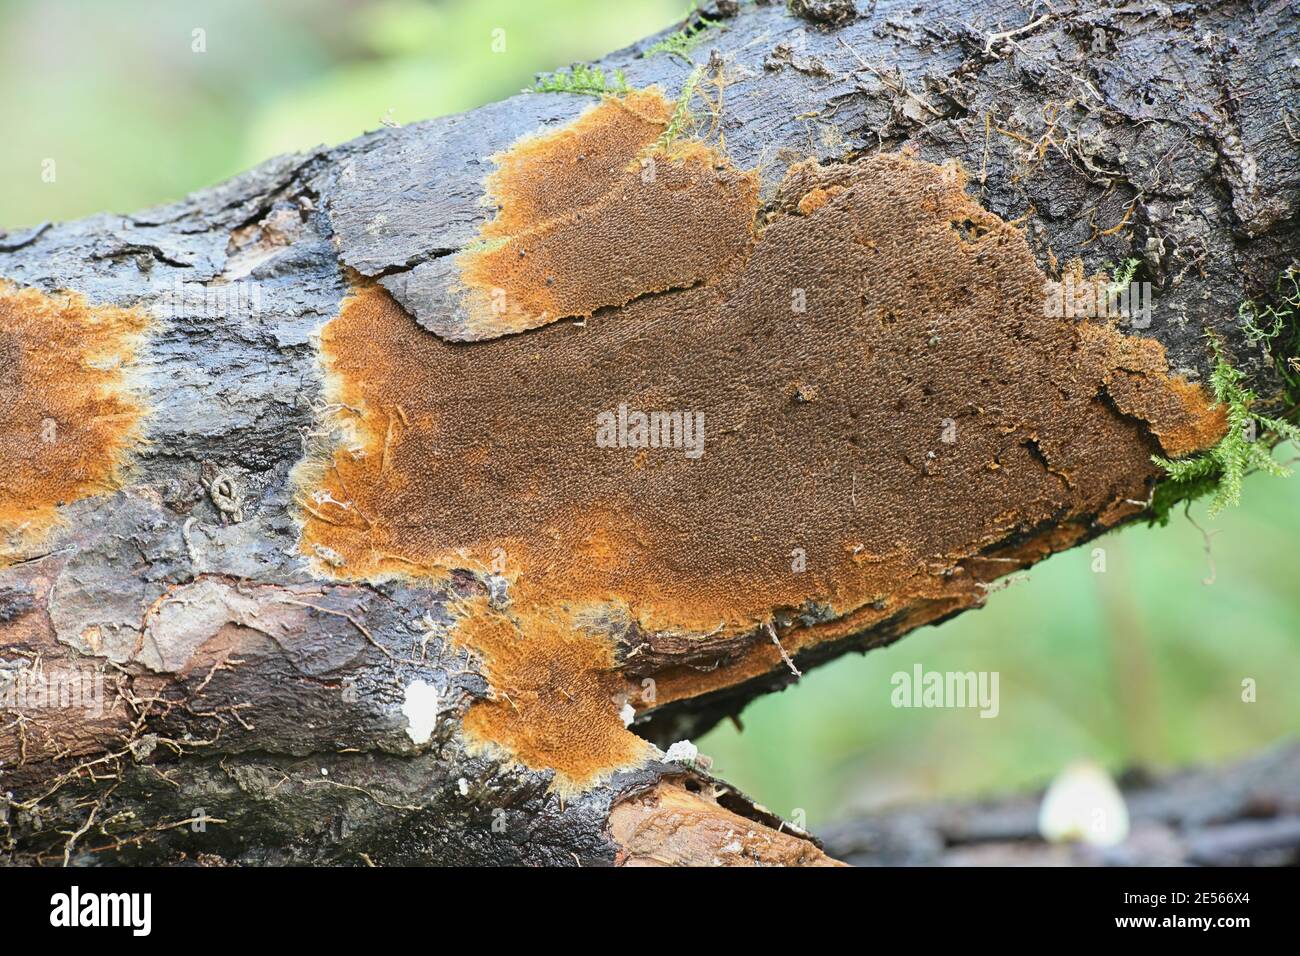 Tomentella crinalis, also called Odontia crinalis, a toothed crust fungus from Finland with no common english name Stock Photo